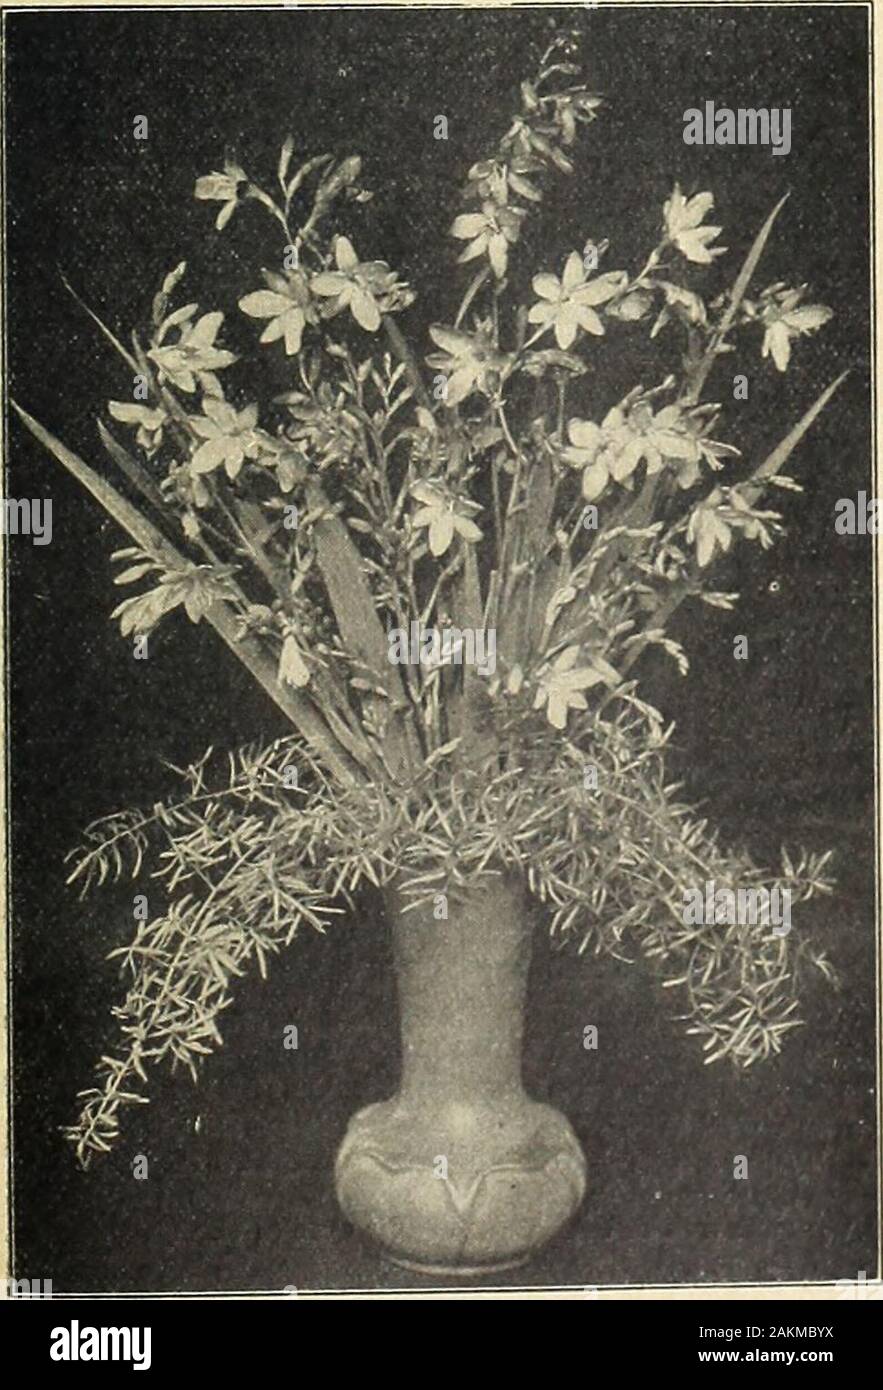 Farquhar's garden annual : 1918 . Lilium speciosum rubrum.. LILIES FOR FORCING. We can supply during the Spring and Summer the followingcold storage. Doz,. Longiflorum giganteum $3.75 Speciosum album 5.00 Speciosum rubrum. ... ... ... ... 3.75 varieties from 25 100 $7.50 $28.00 10.00 38.00 7.00 27.00 MONTBRETIAS. Hardy border plants, with elegant and gracefully branched Gladiolus-likeflowers, which are now much prized for cutting during Summer. The colors varyfrom clear yellow to rich scarlet, and the plants grow- about two feet in height. Plantthe bulbs five inches deep and protect them durin Stock Photo